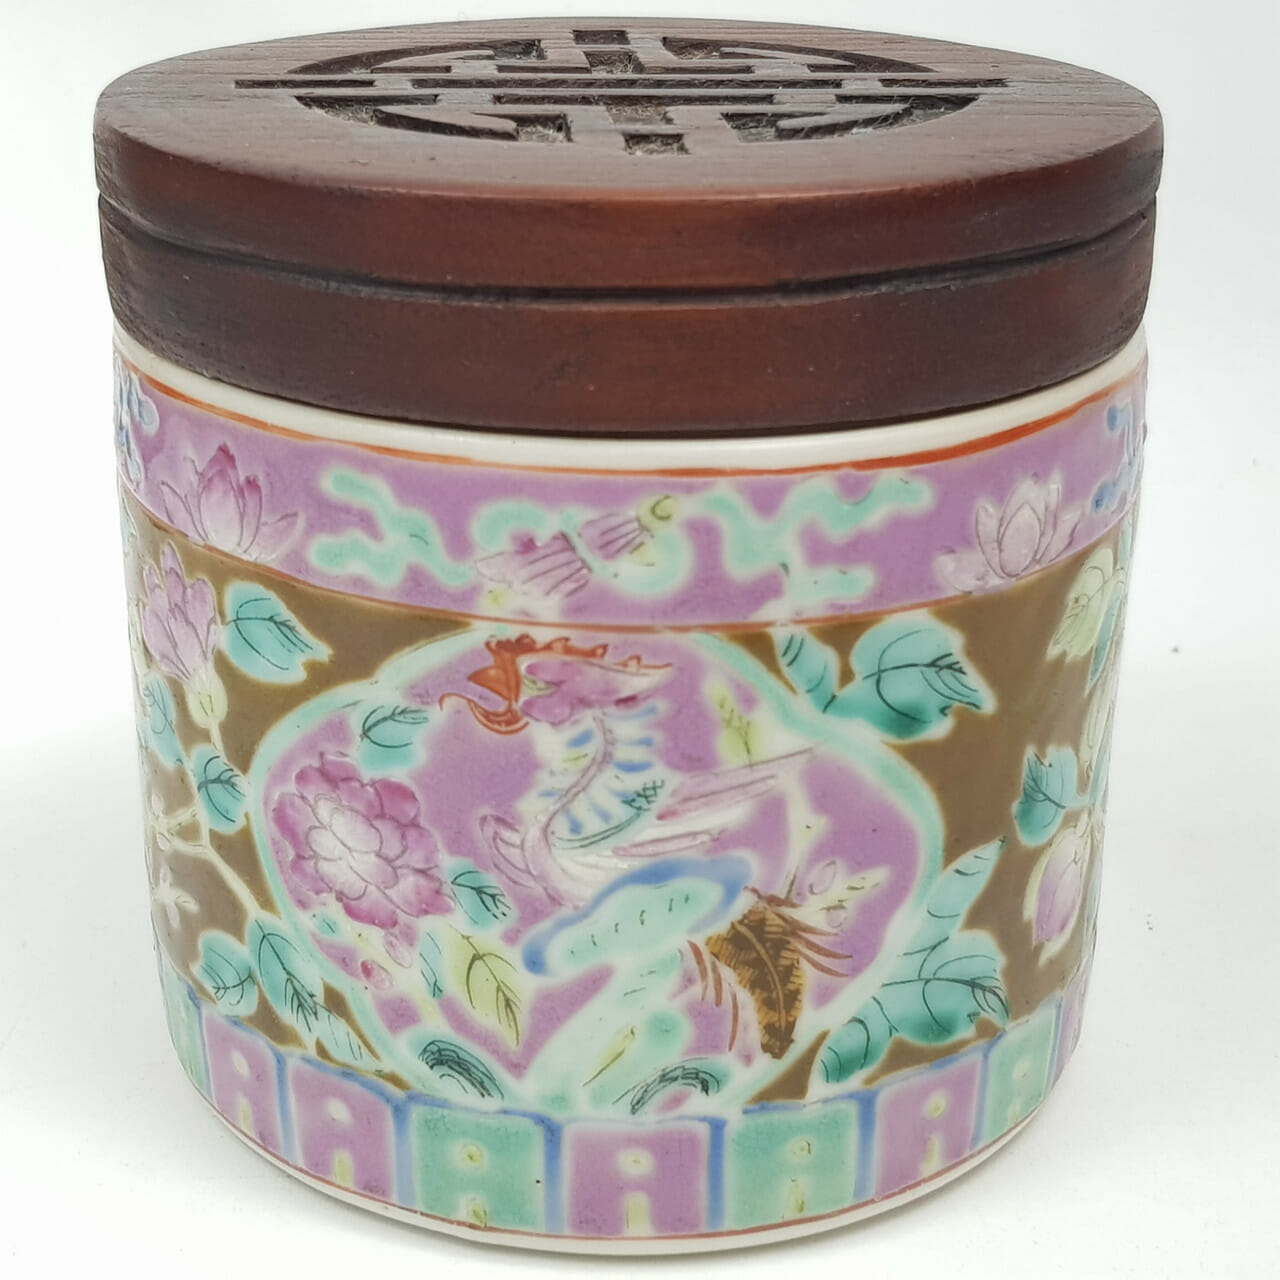 CHINESE MINHUO TEA CADDY PORCELAIN WITH WOODEN LID C/1900'S #52338